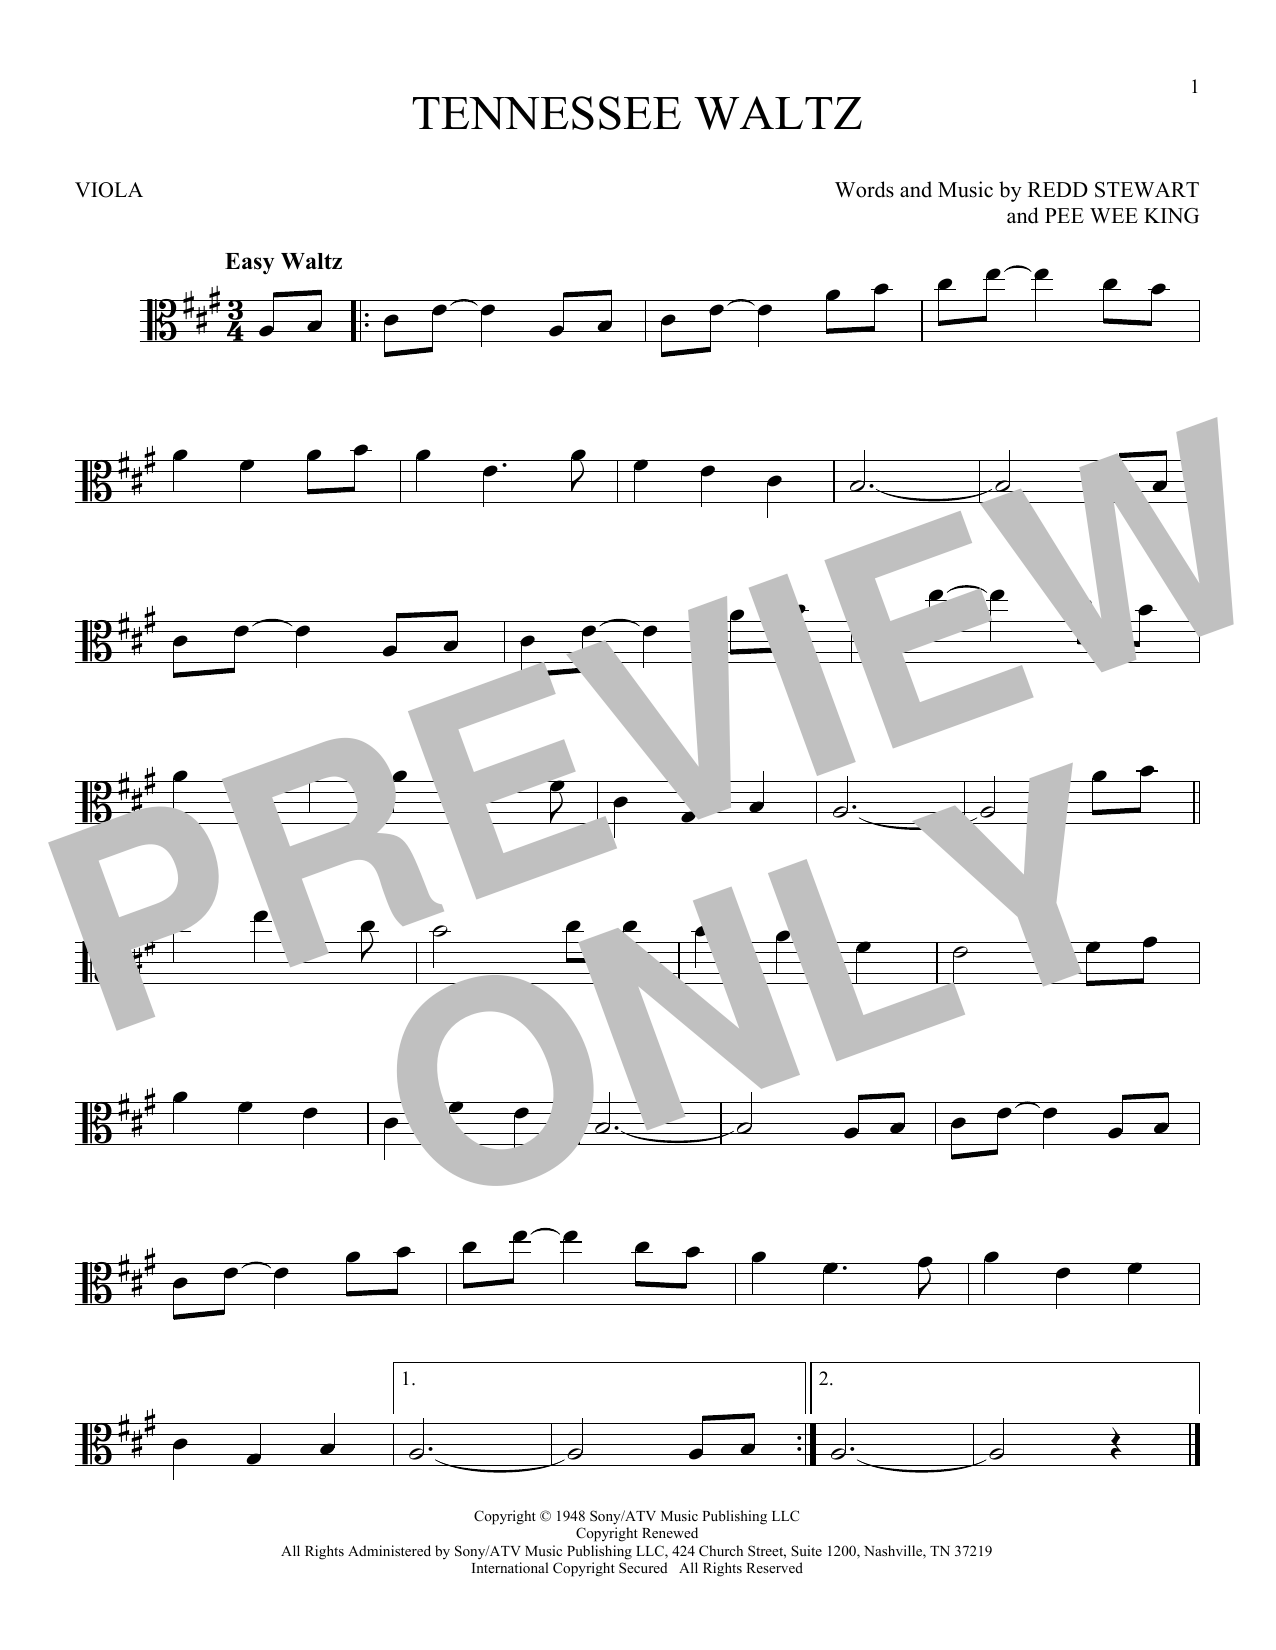 Download Pee Wee King Tennessee Waltz Sheet Music